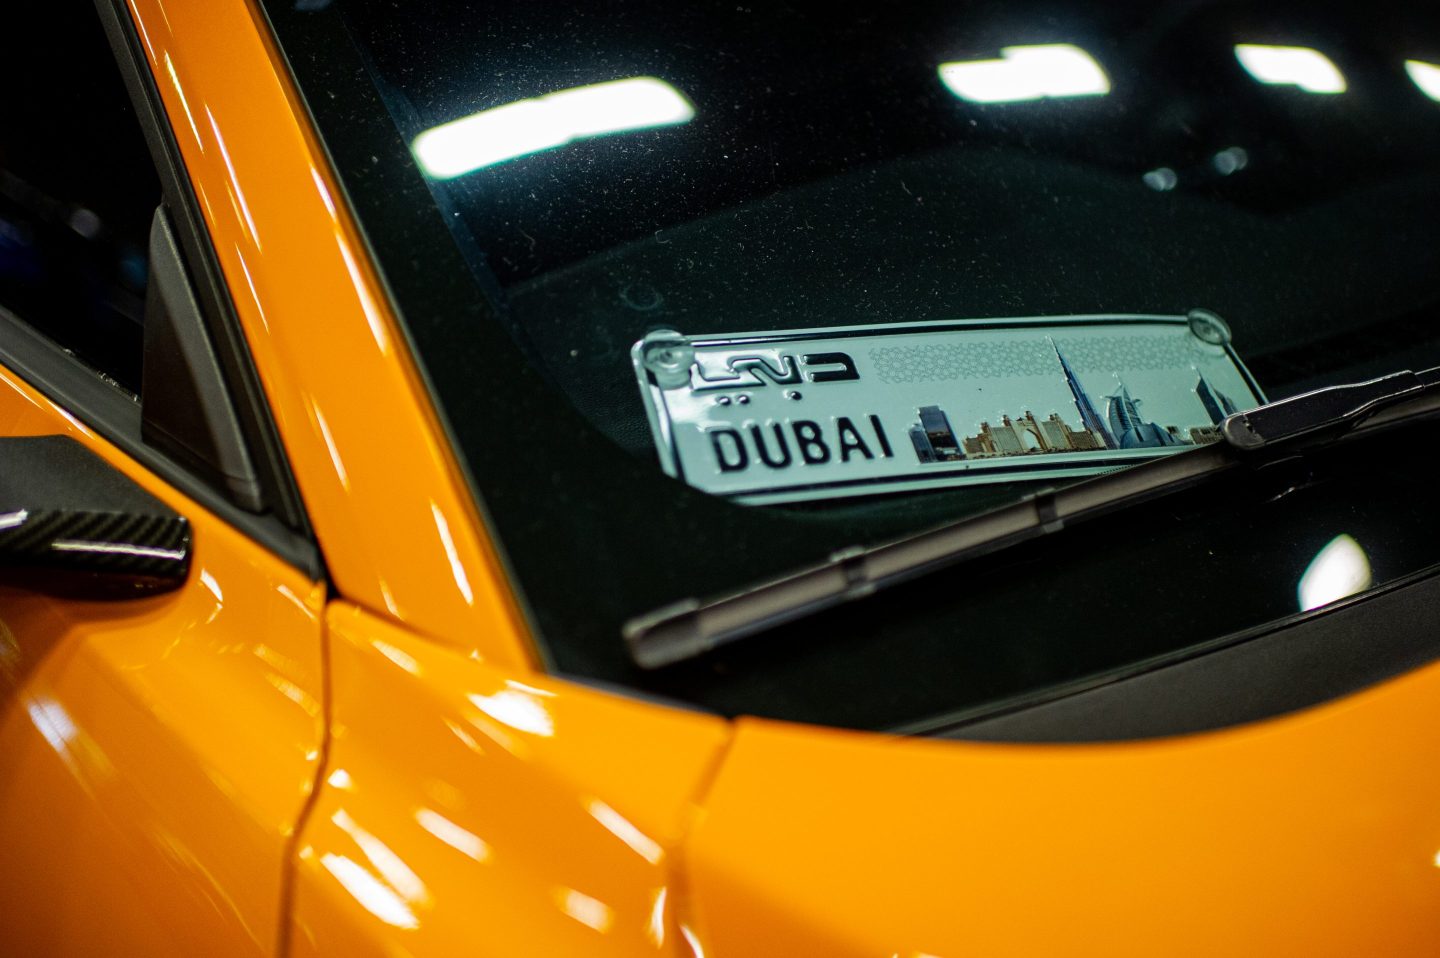 This rare car license plate P7 just cost someone $15 million